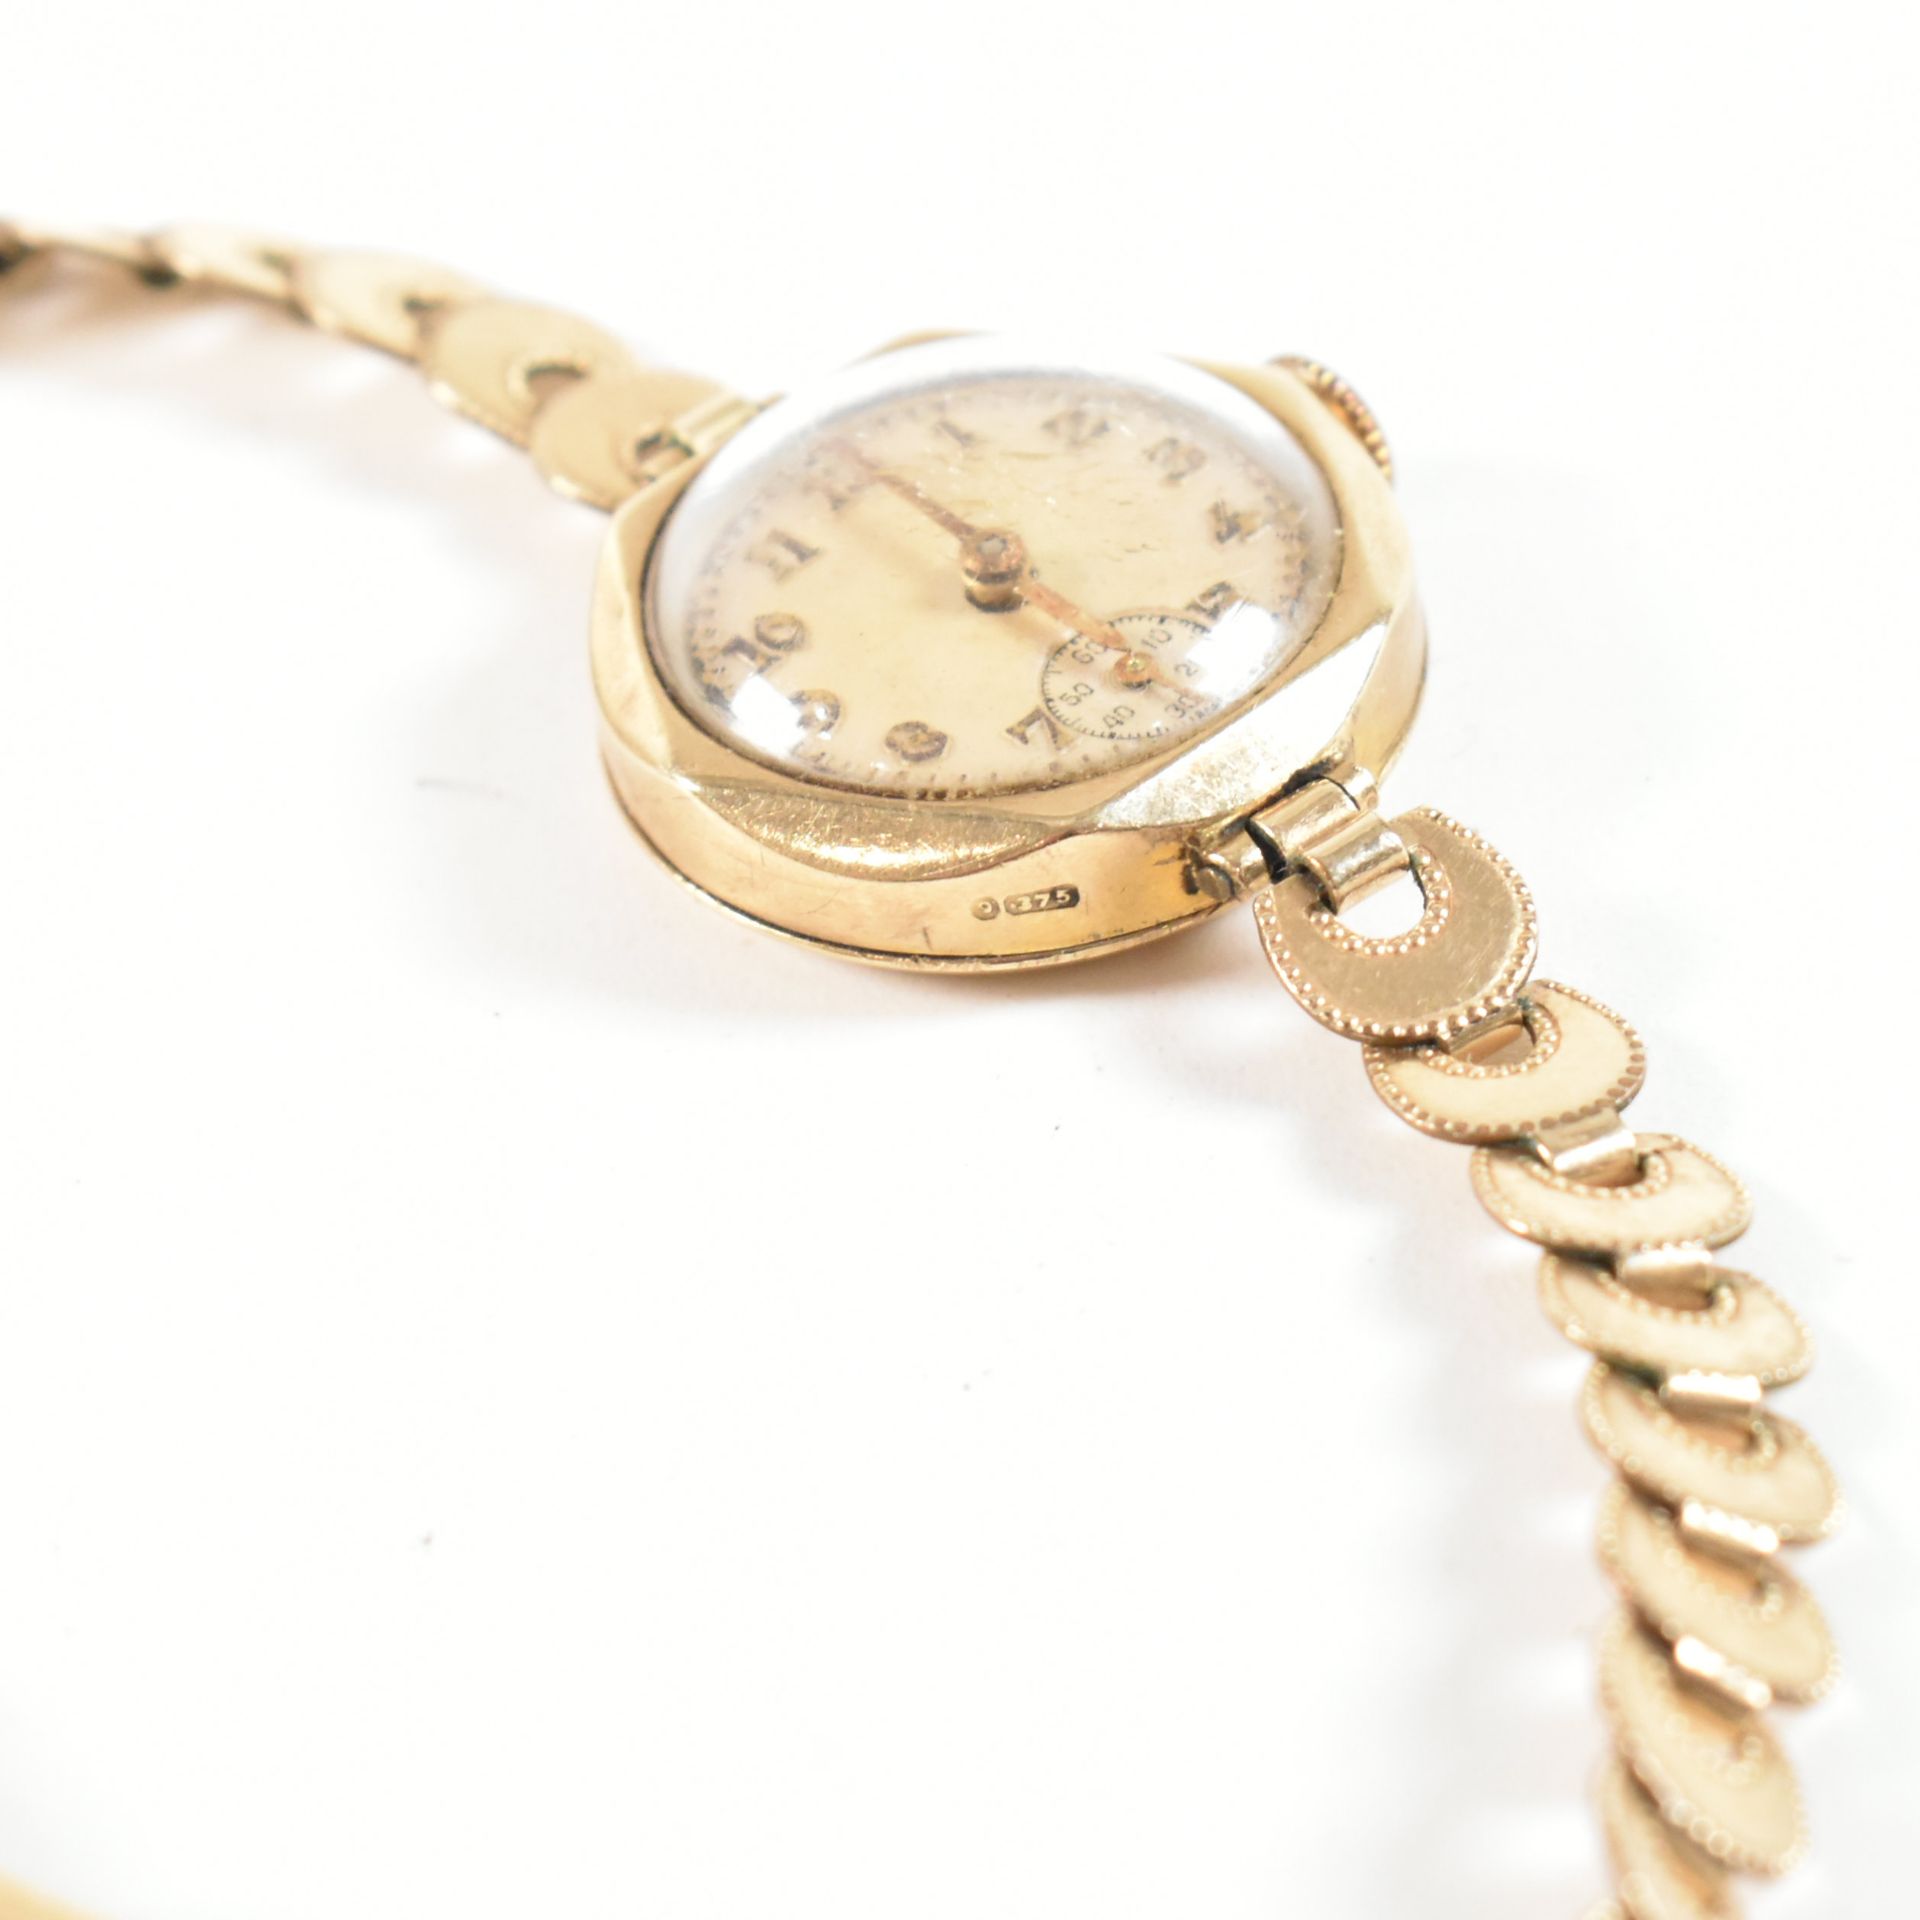 9CT GOLD ACCURIST DRESS WATCH & ANOTHER - Image 3 of 4